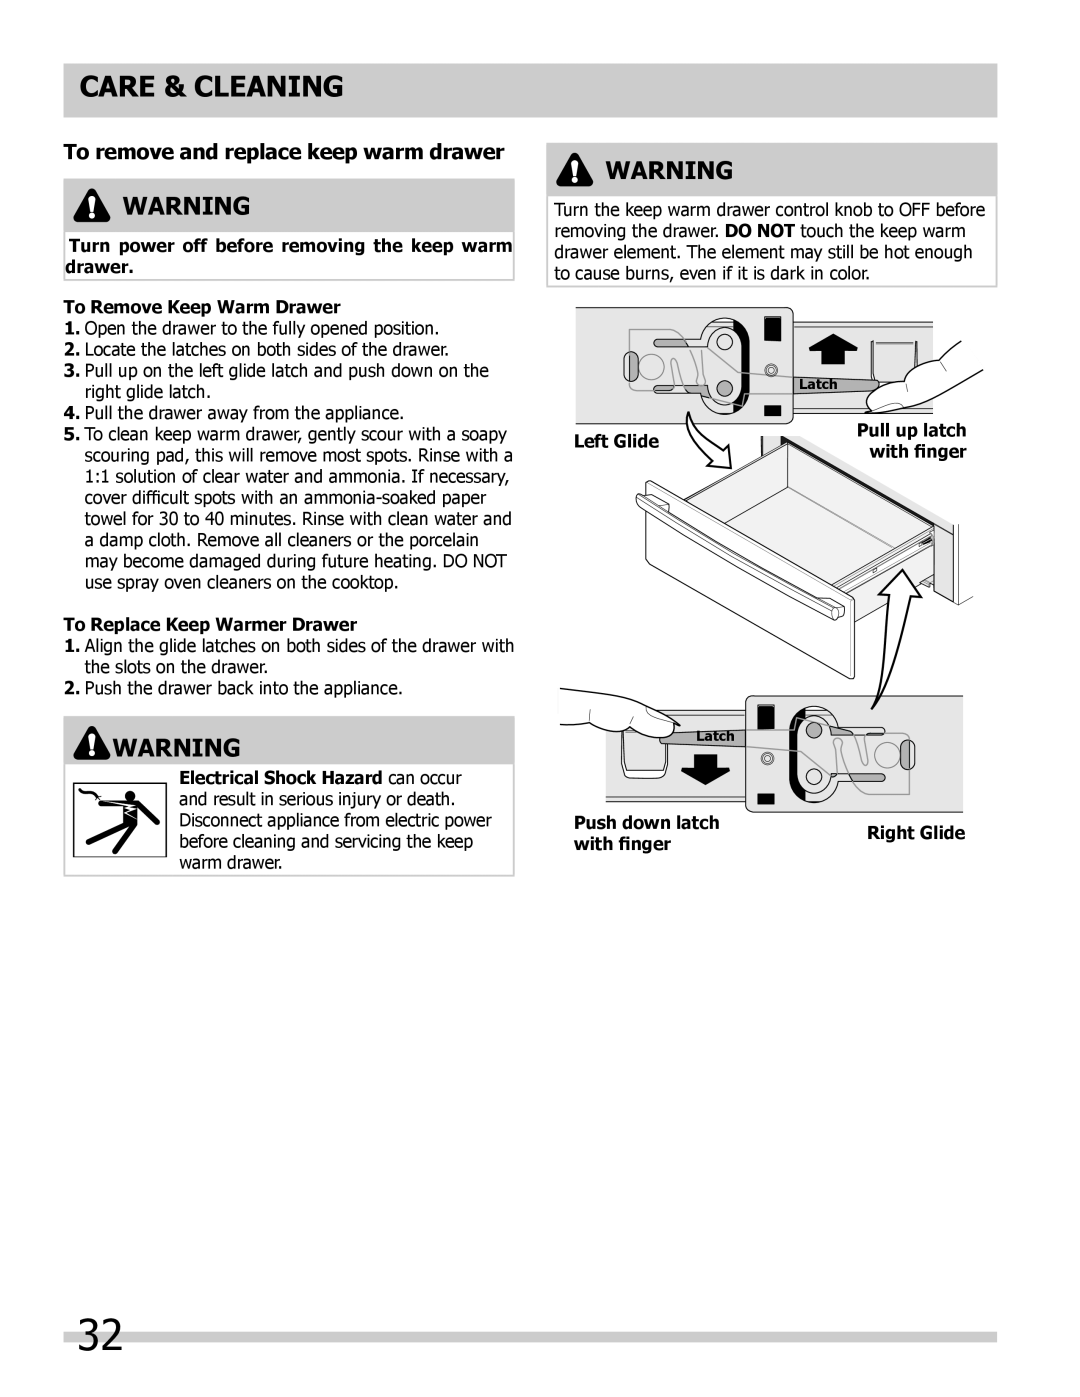 Frigidaire 318205852 manual To remove and replace keep warm drawer, Turn power off before removing the keep warm drawer 